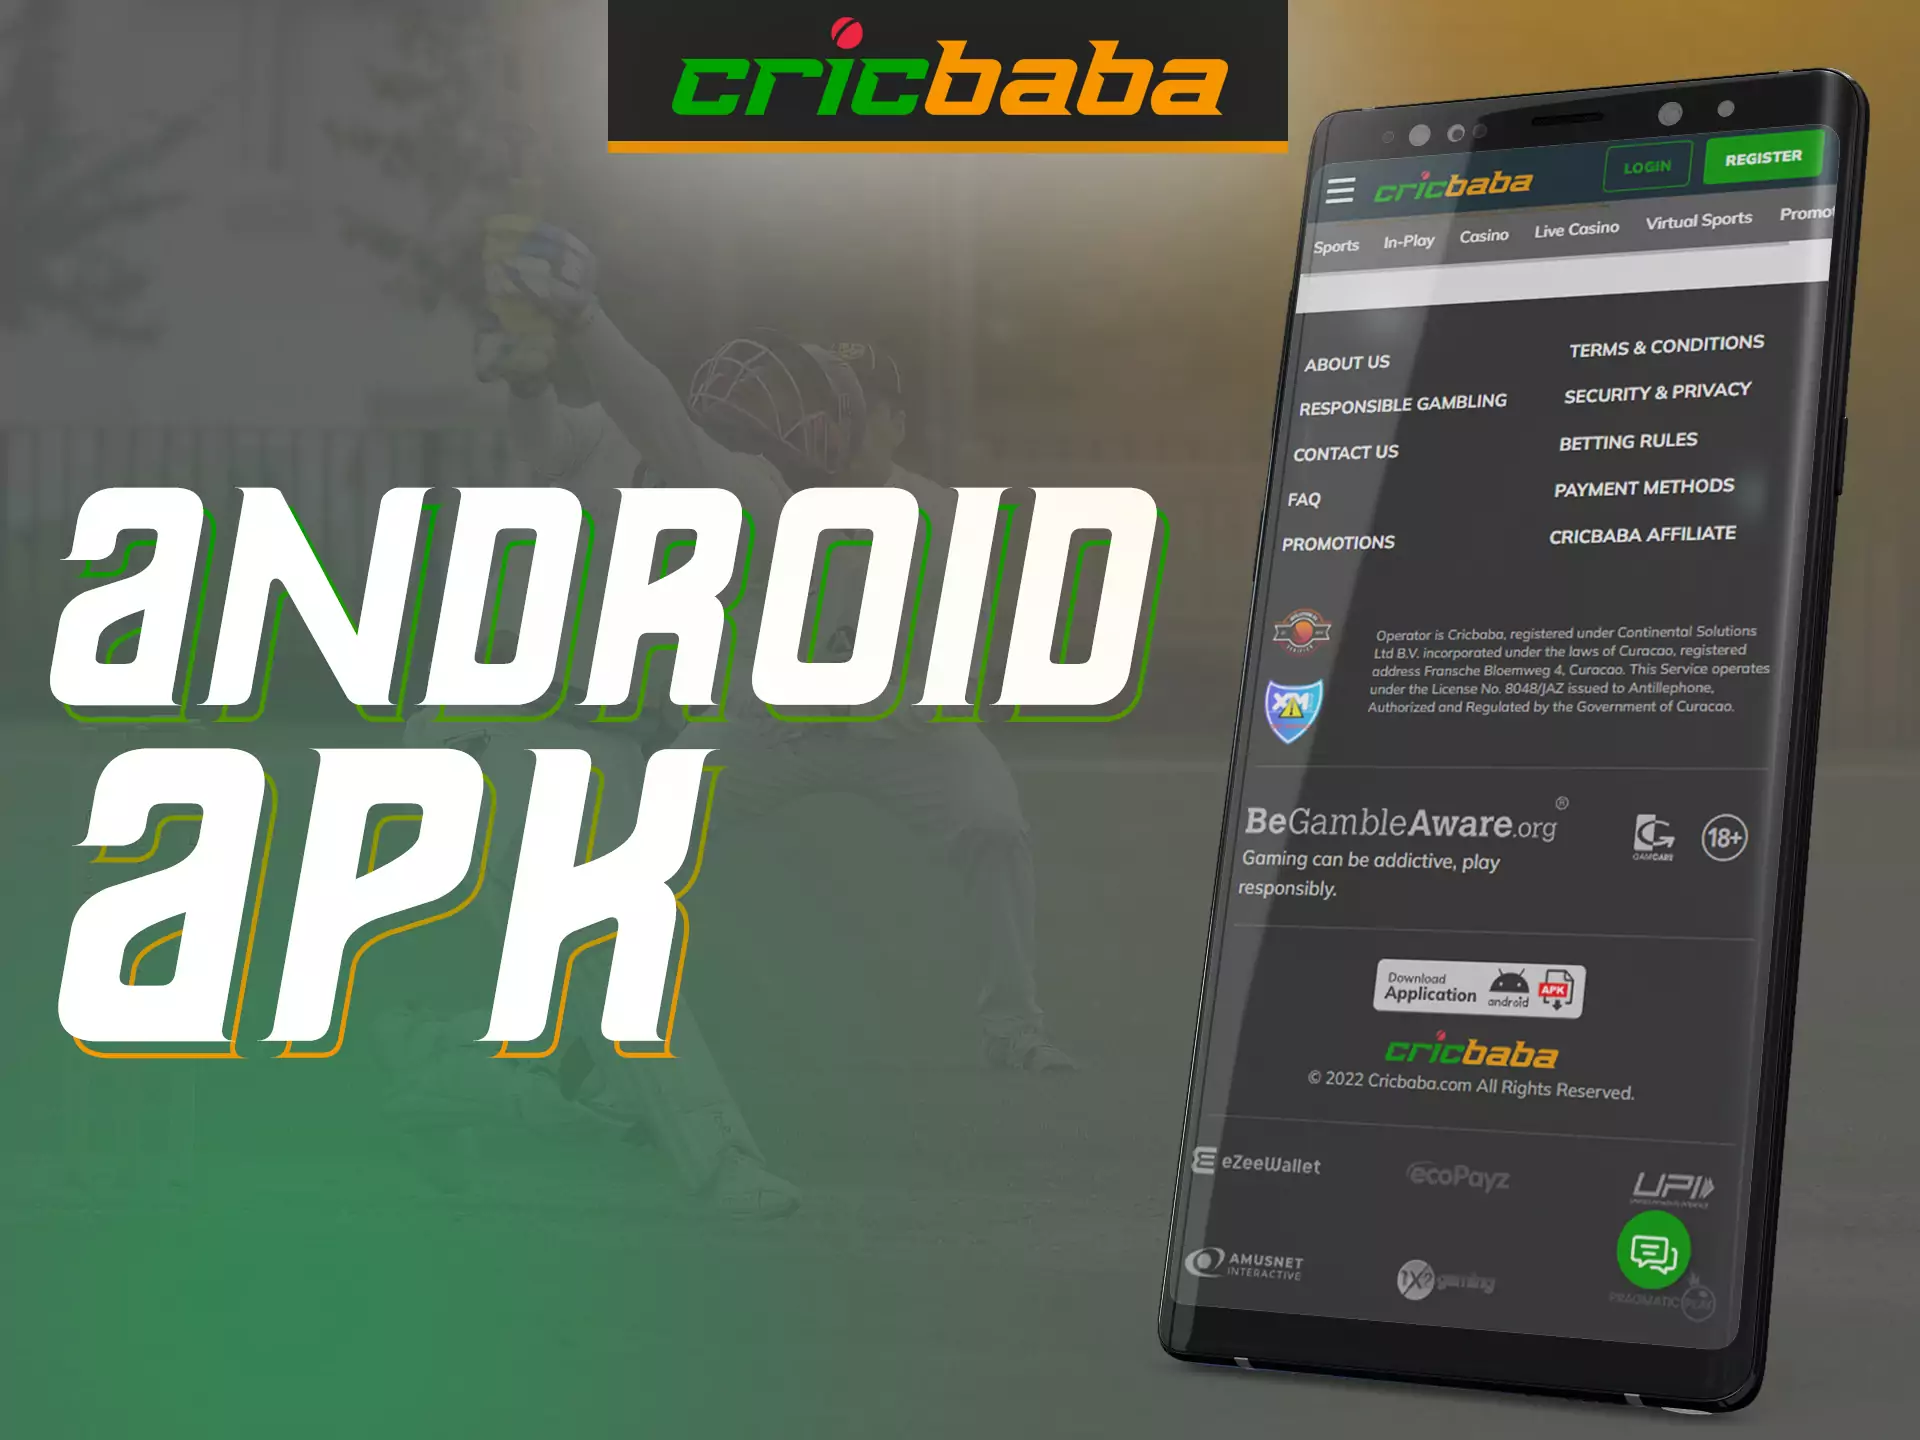 Cricbaba offers a easy-to-use application for users of Android devices.